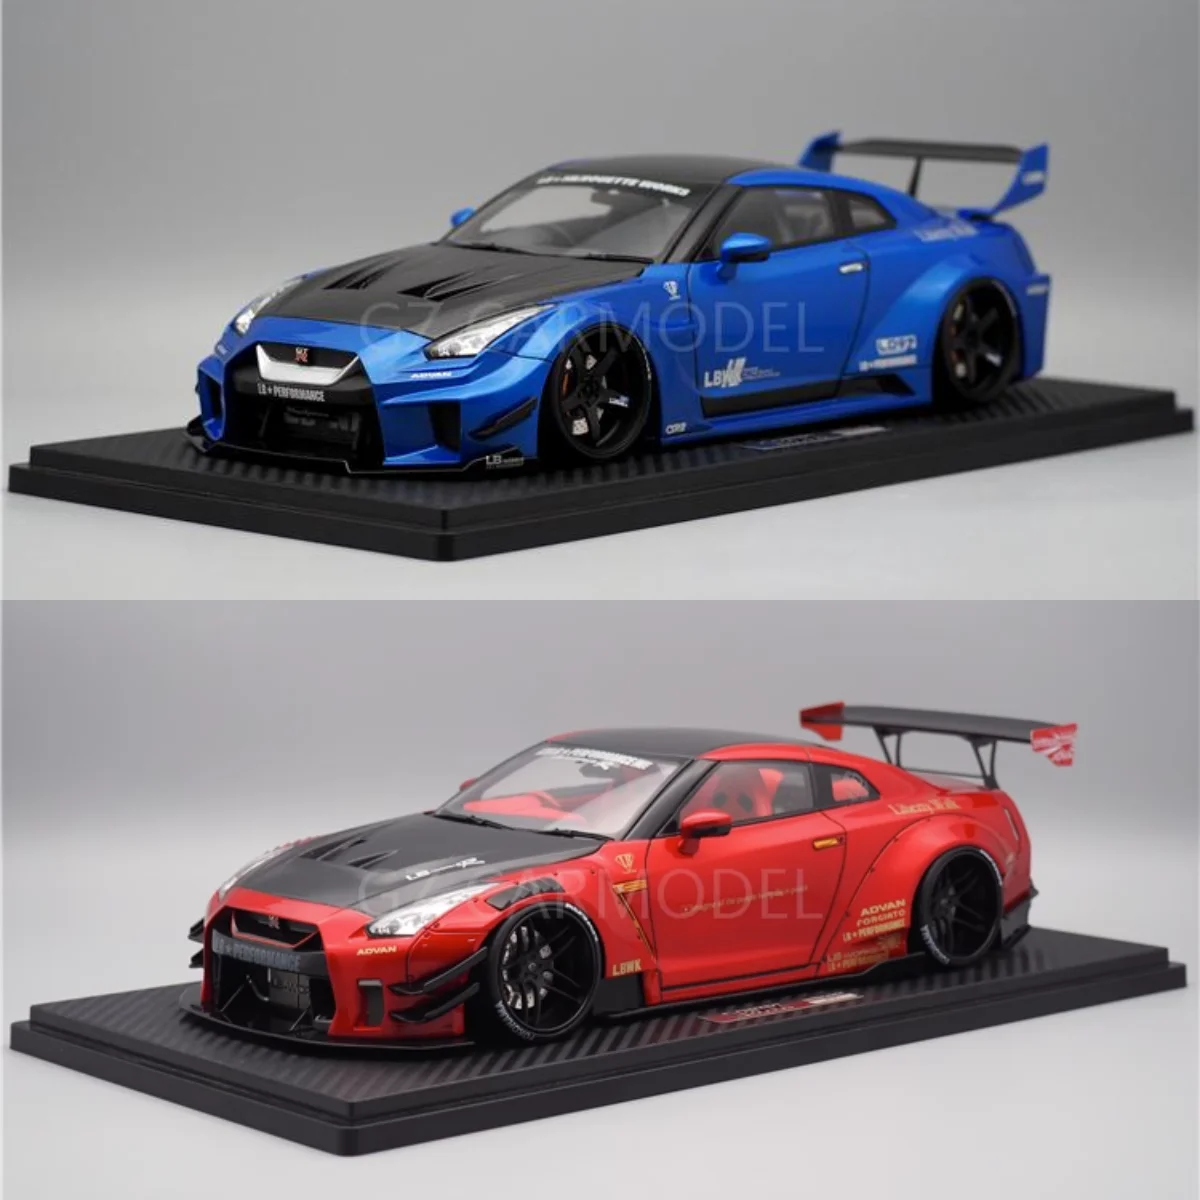 

IG 1:18 For Nissan GTR R35 Series Type 2 LB WORKS JDM Limited Edition Simulation Resin Static Car Model Toy Gift